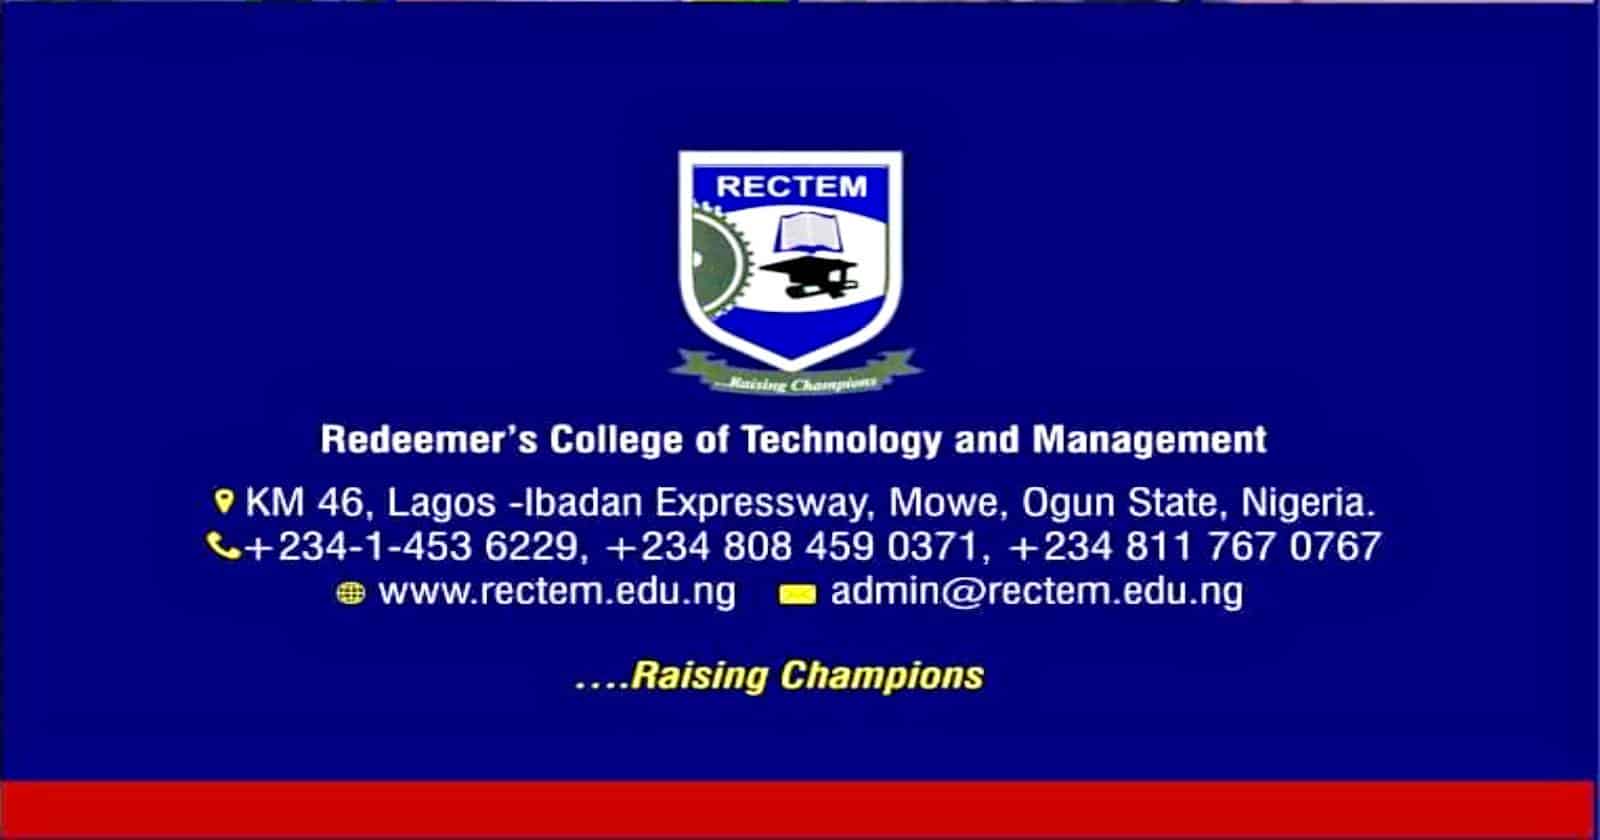 
Redeemer's College of Technology and Management (RECTEM) Admission List